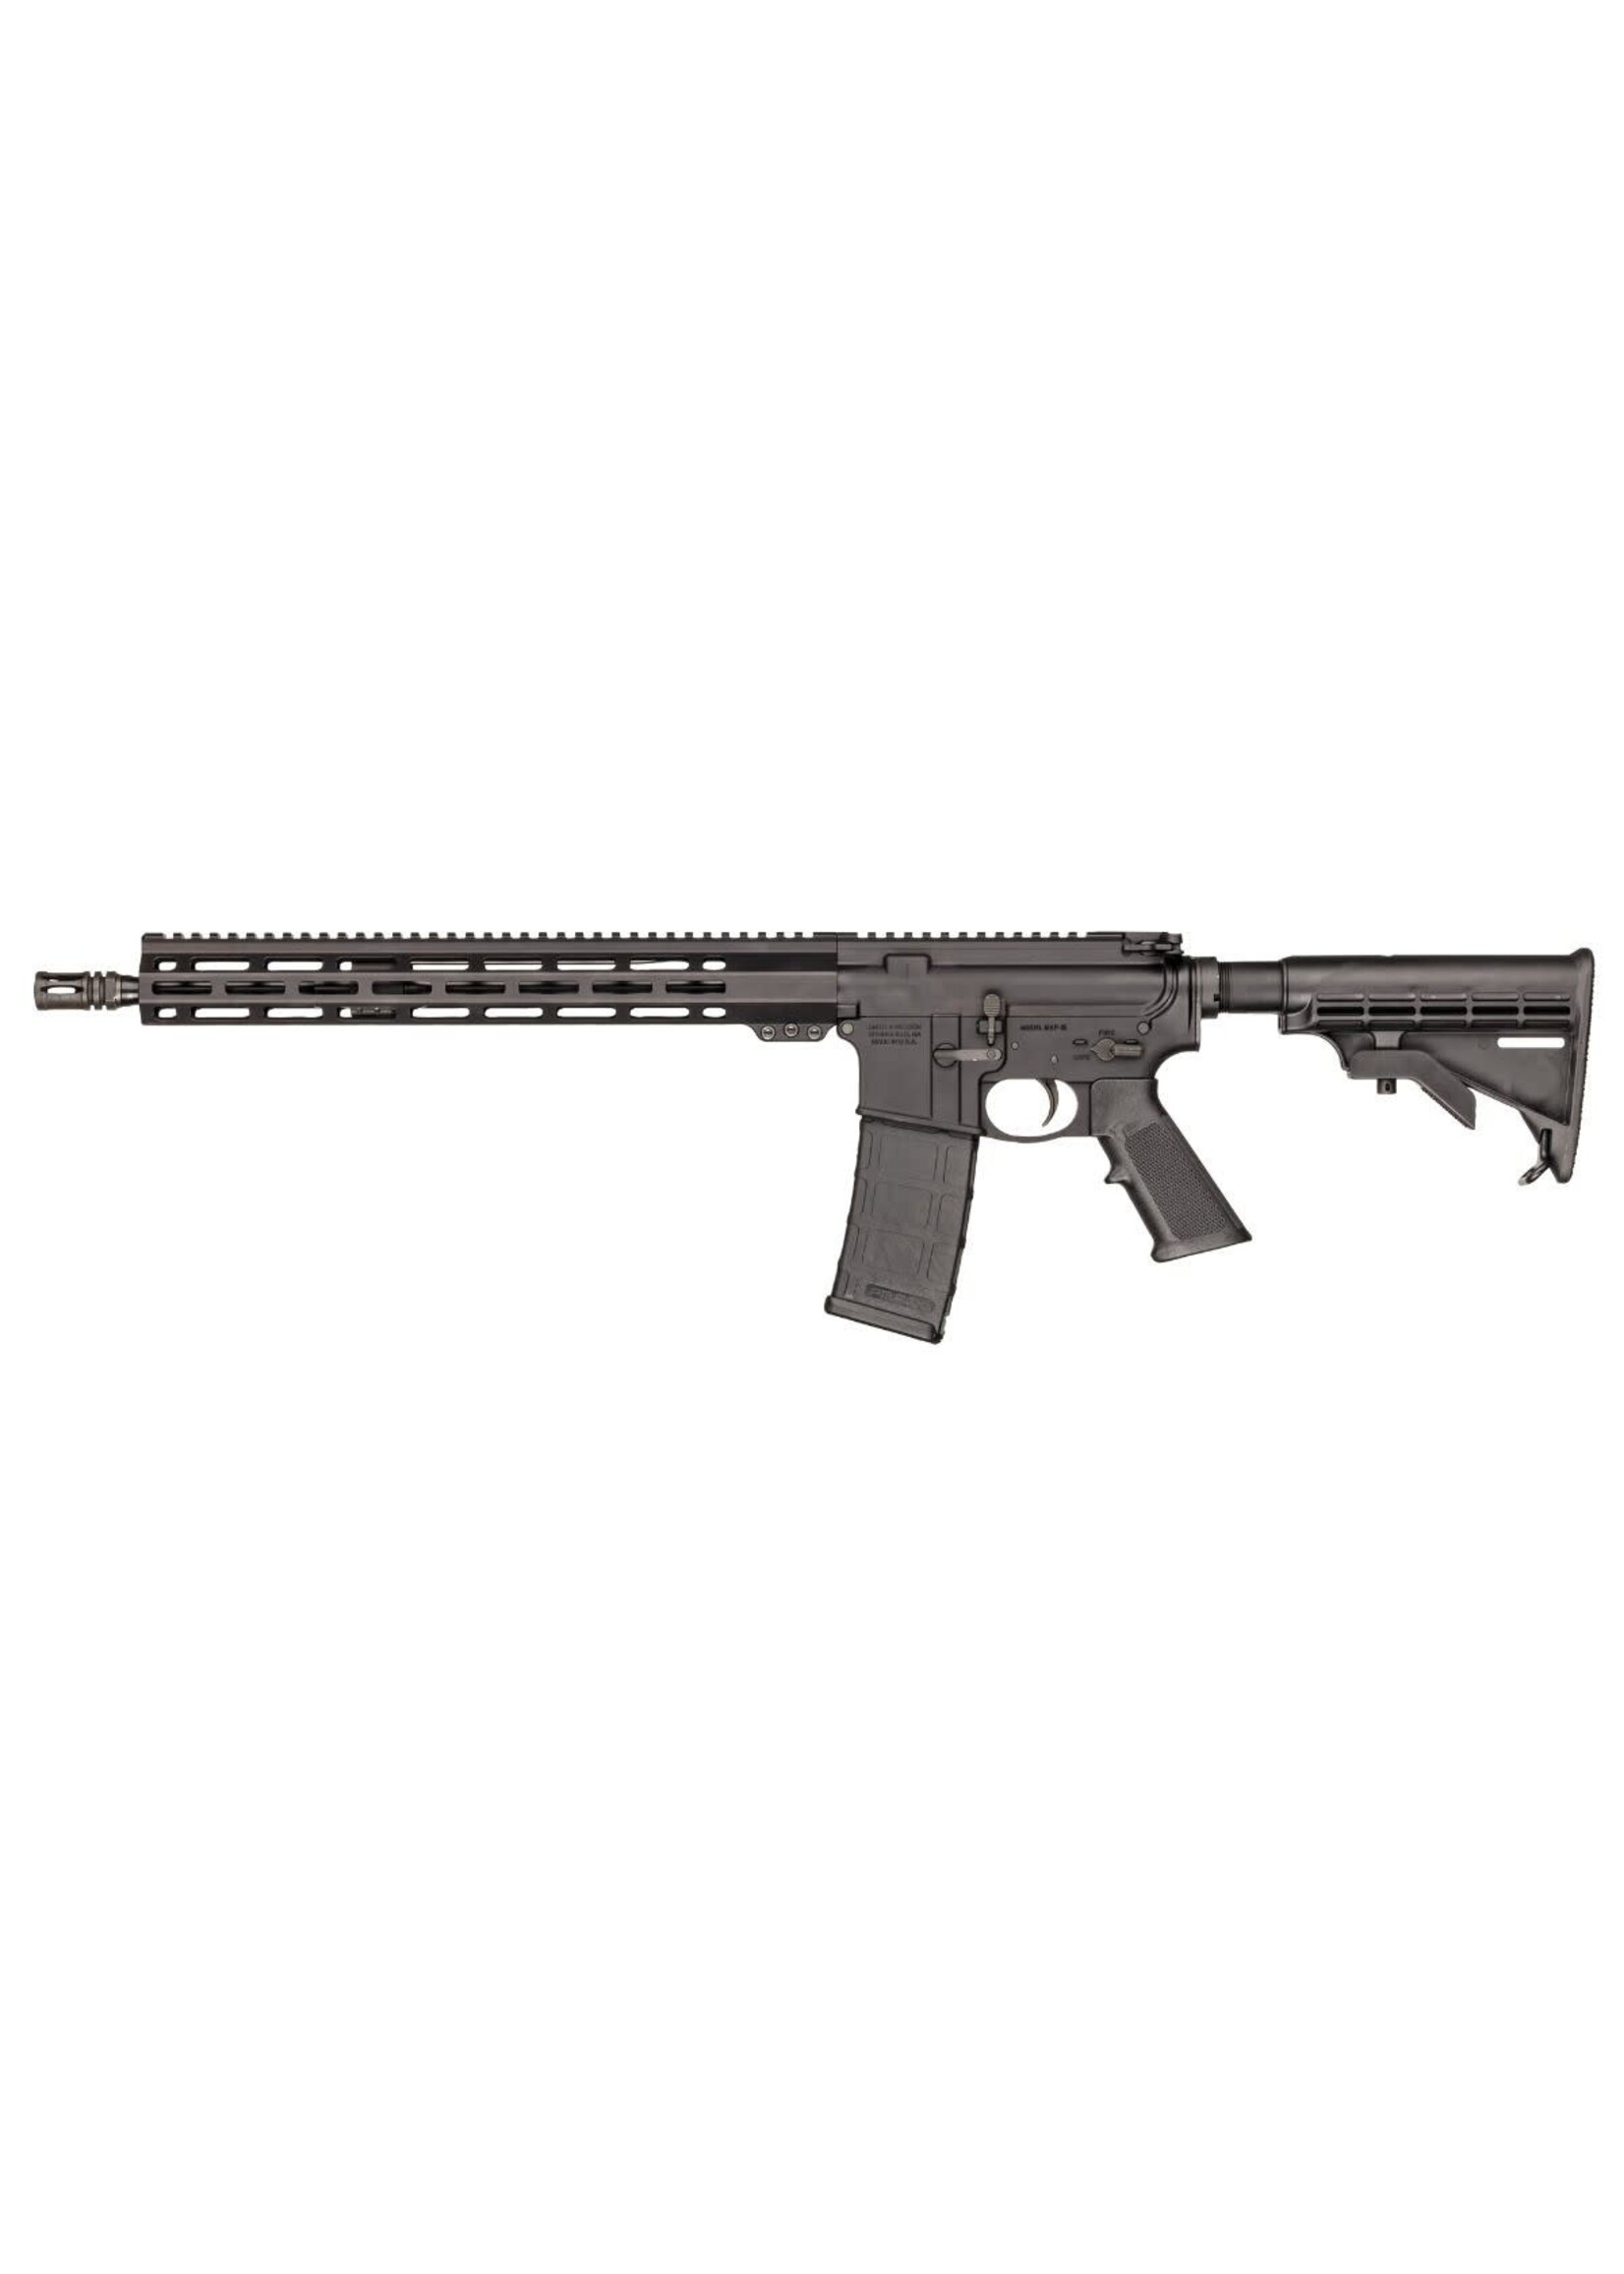 SMITH & WESSON SMITH & WESSON M&P15 SPORT III .223/5.56 30RD 16.25"